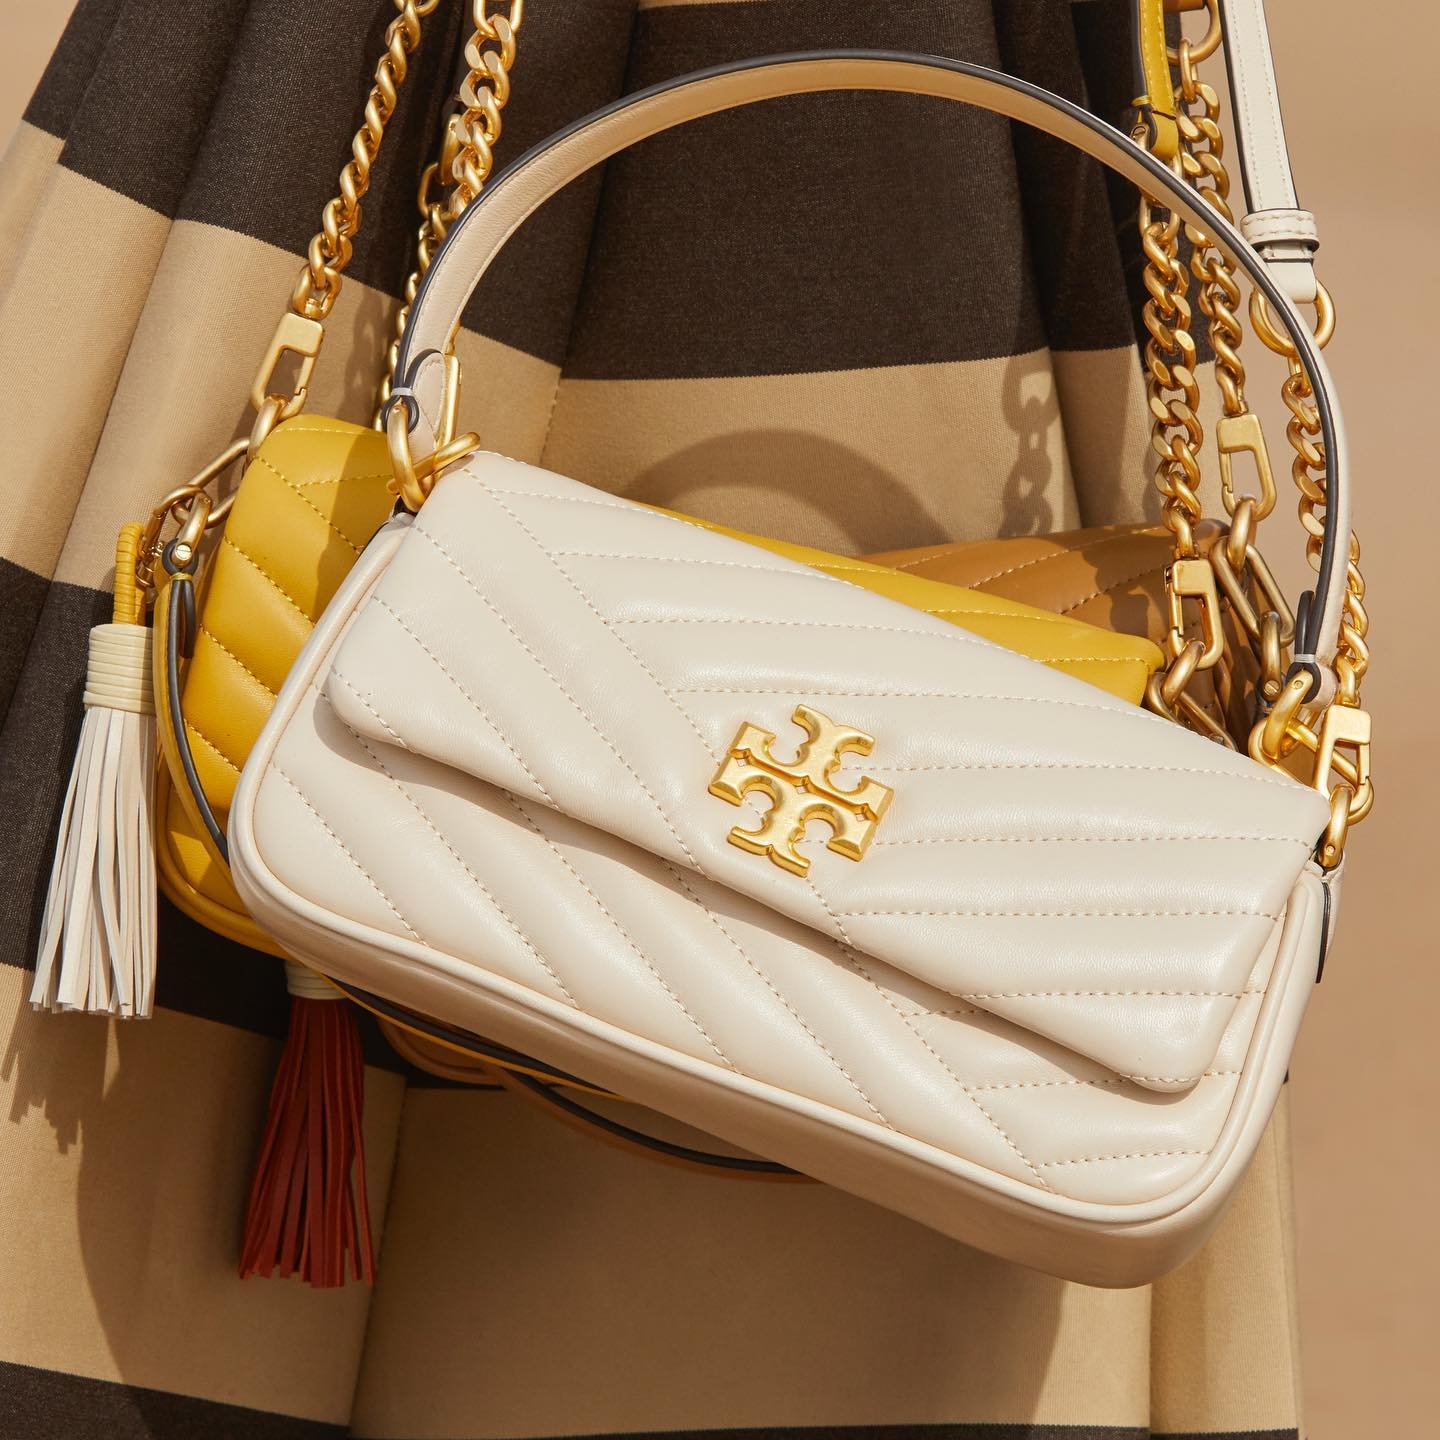 Tory Burch Review - Must Read This Before Buying